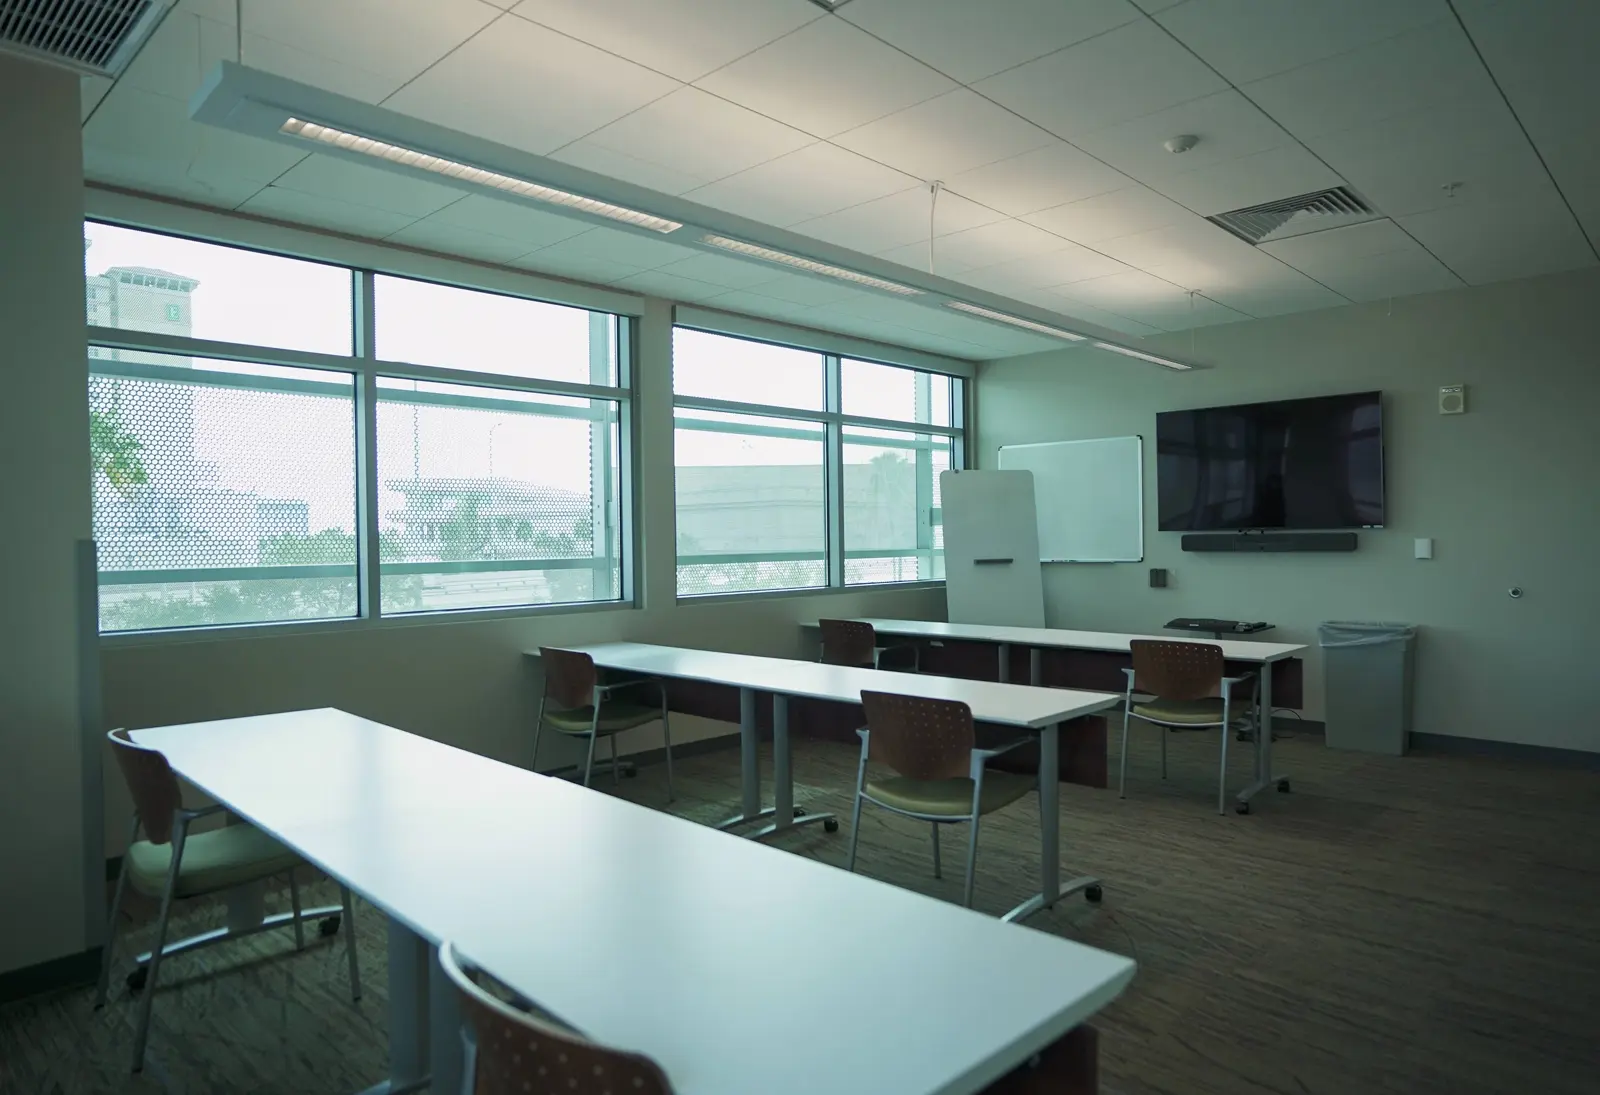 CAMLS A brightly lit classroom with large windows, three white tables, and several chairs. The room has a wall-mounted flat-screen TV, a whiteboard, and light green walls. The ceiling lights are on, and the outside view includes buildings and a cloudy sky.